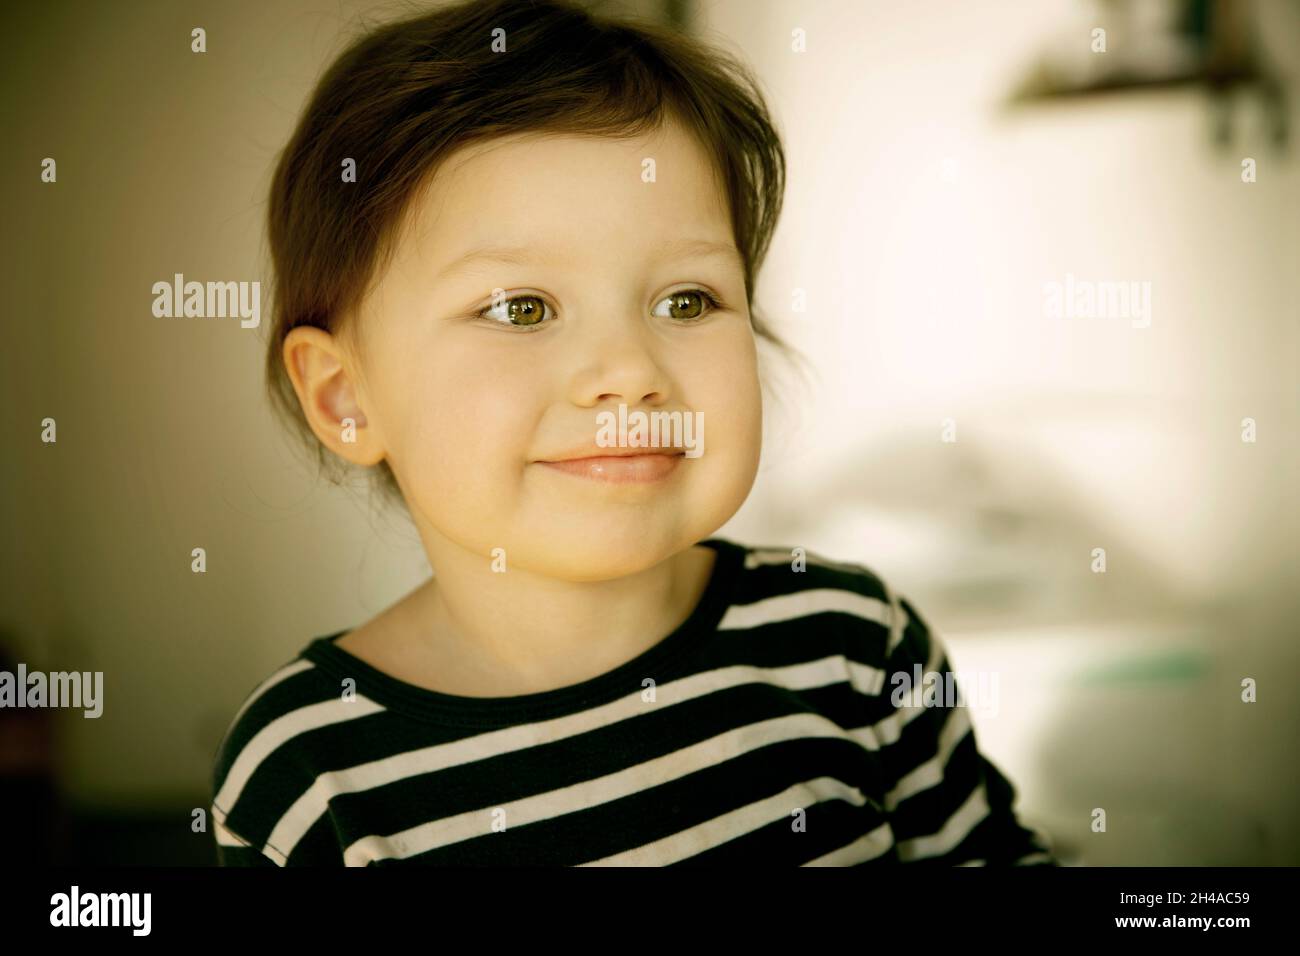 Adorable baby girl with cute smile Stock Photo